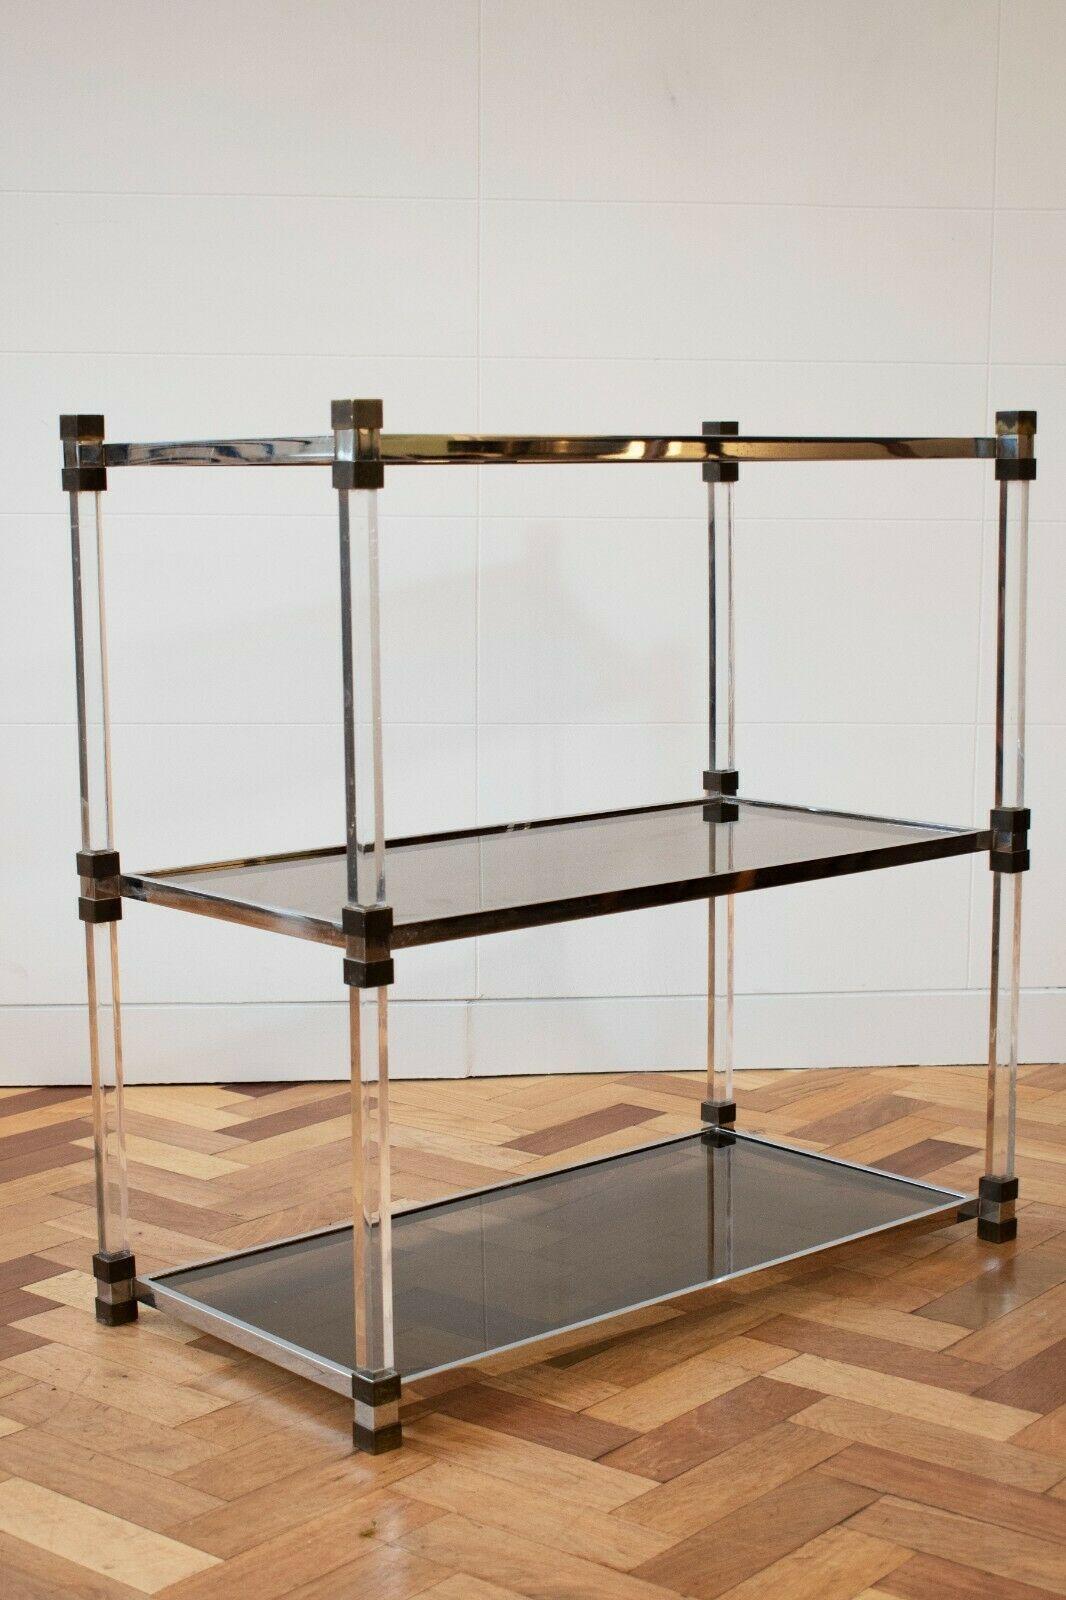 A sleek and stylish 1970's French perspex, brass and tinted glass three tier shelving unit by Etagere.

Comprising of three different materials, this shelving unit is a perfect example of sleek simplicity and would work in any interior. 

The smoked